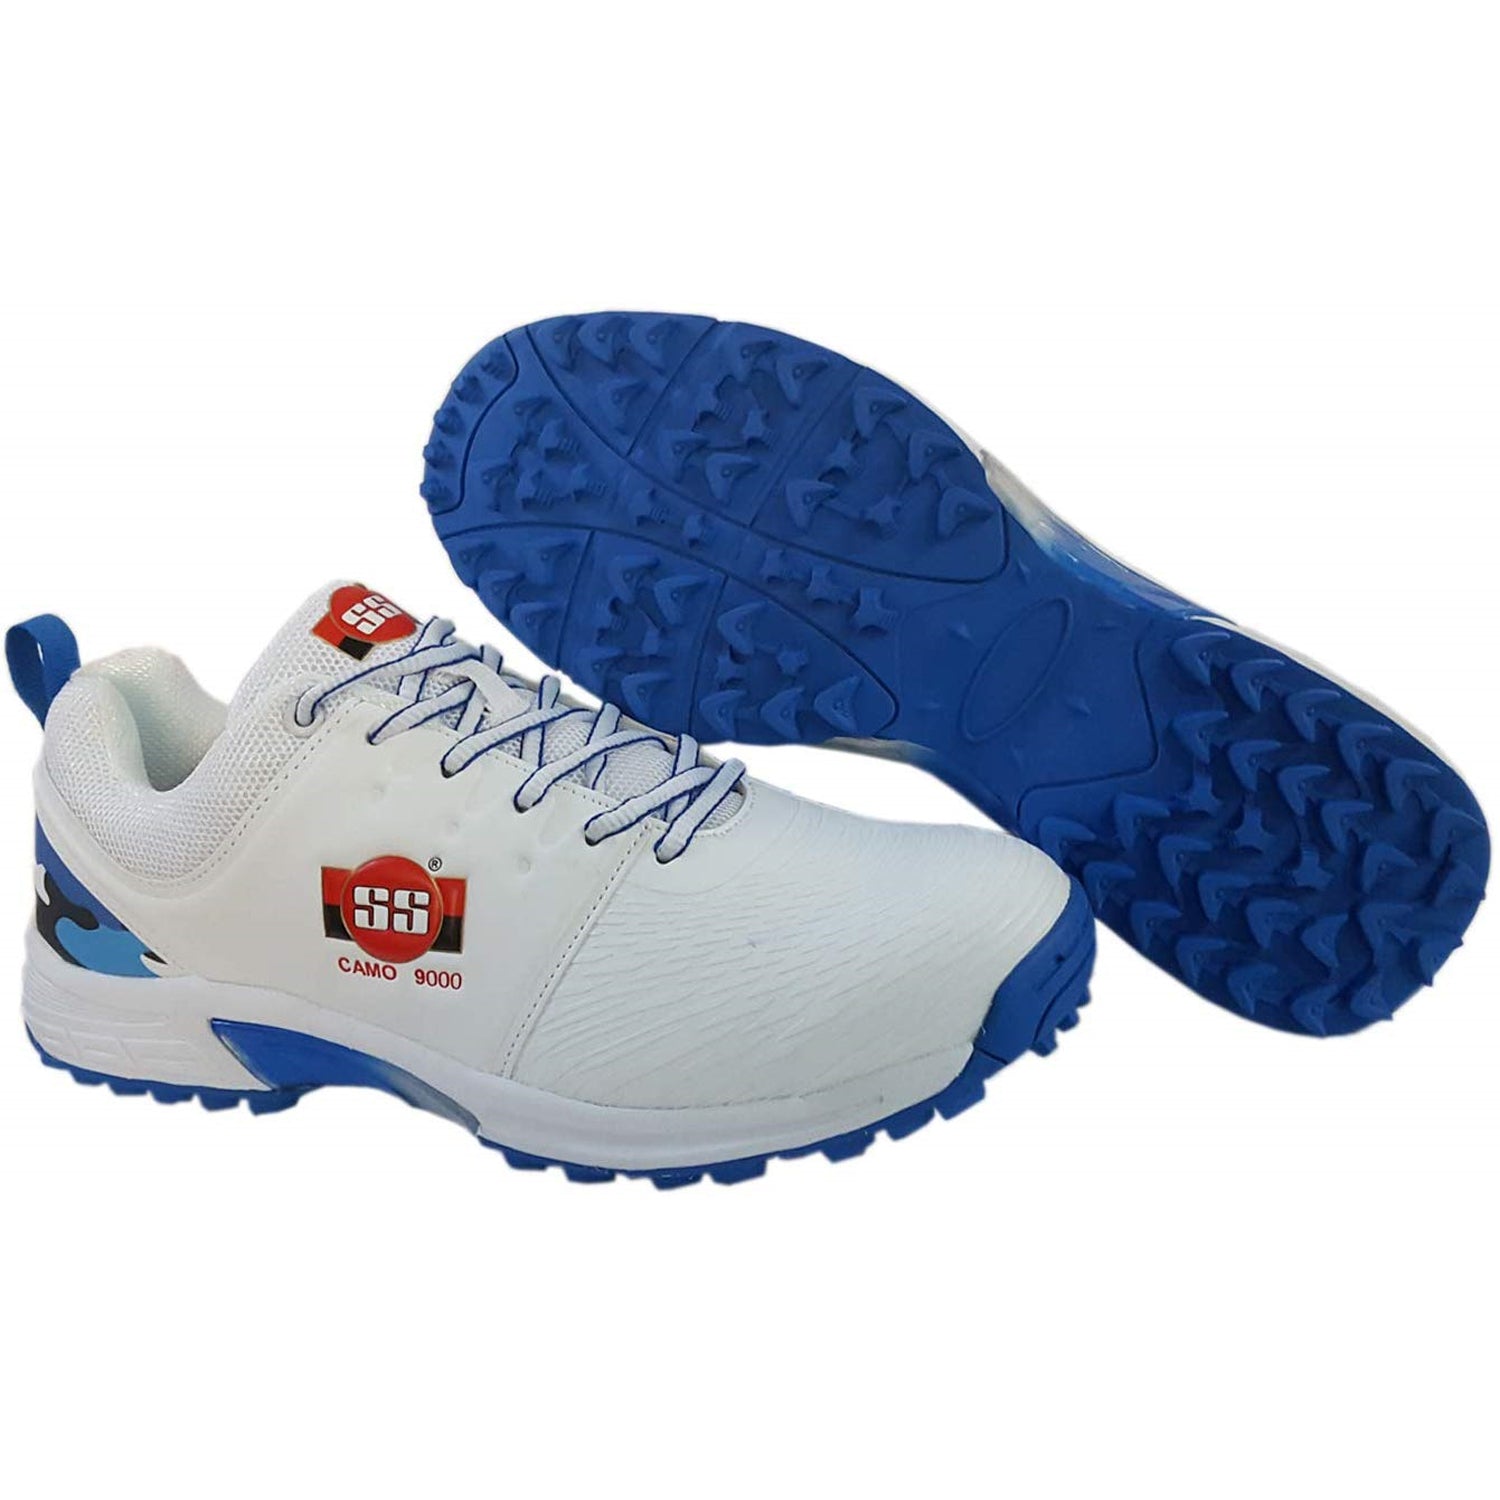 SS Josh Cricket Shoes Shoes White Orange,- Buy SS Josh Cricket Shoes Shoes  White Orange Online at Lowest Prices in India - | khelmart.com